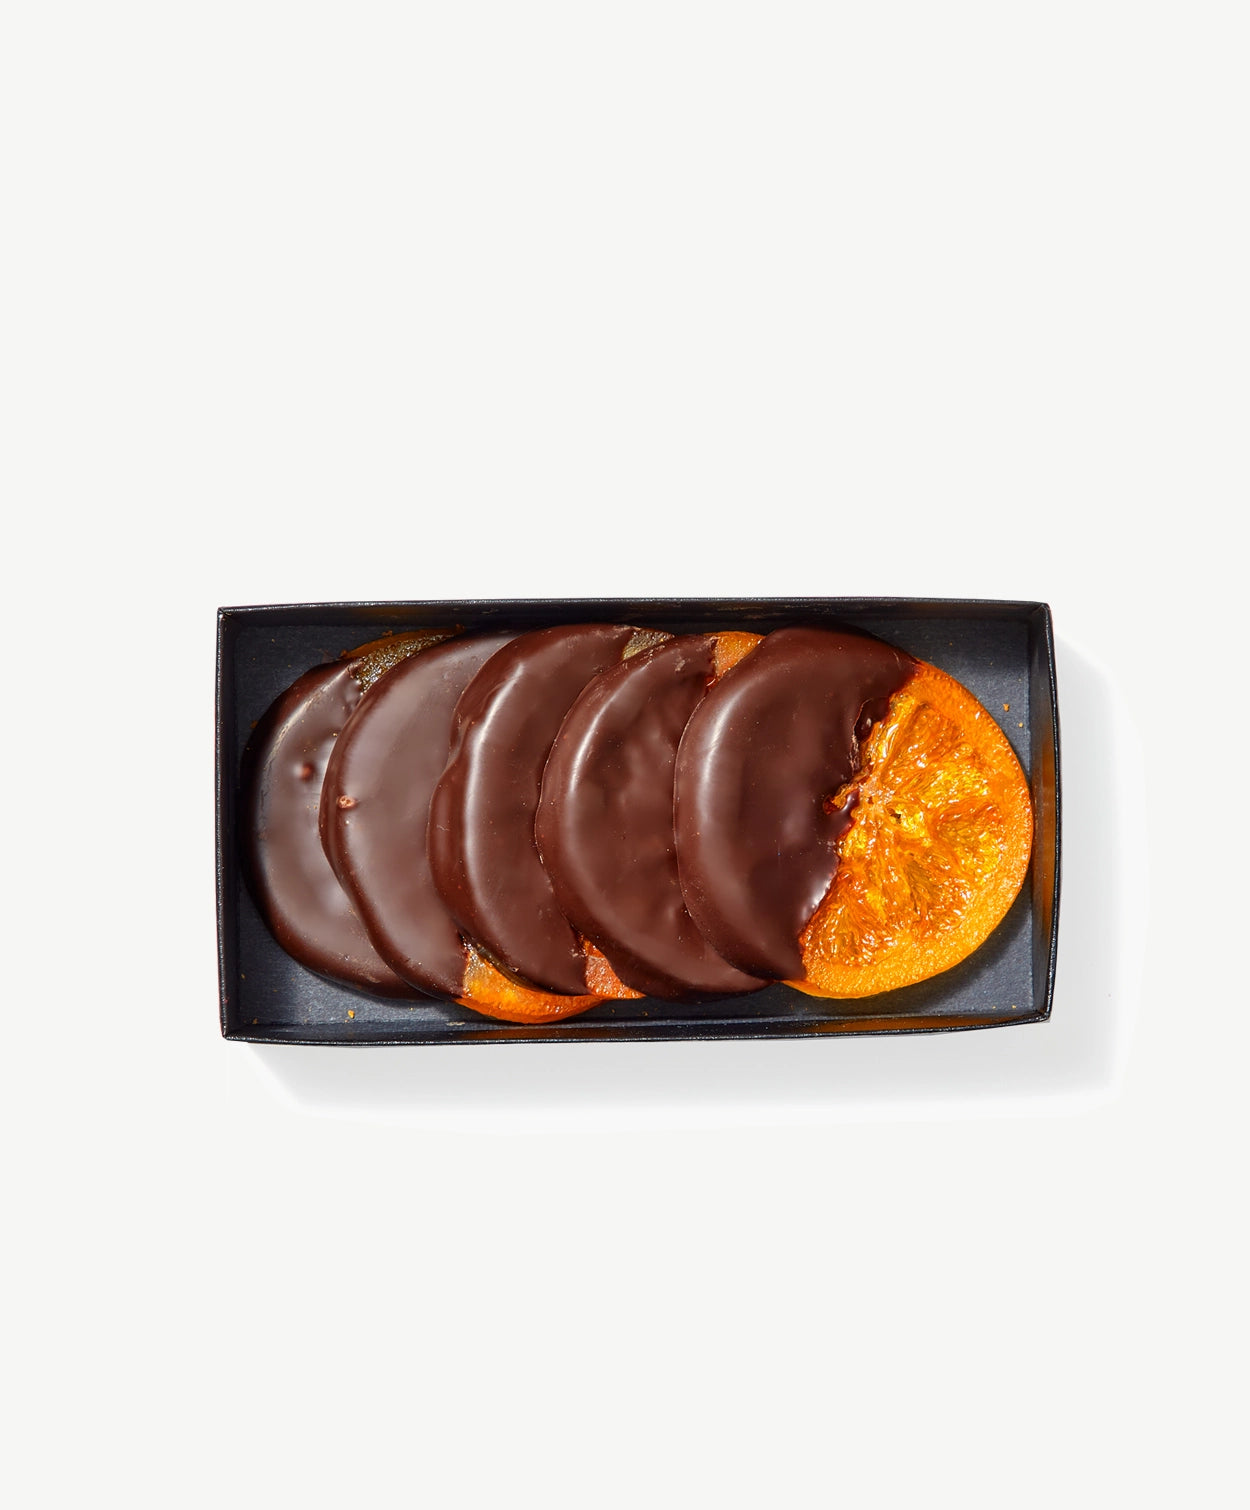 Several crystalized candied orange slices dipped in Vosges chocolate in a clear package on a grey background.